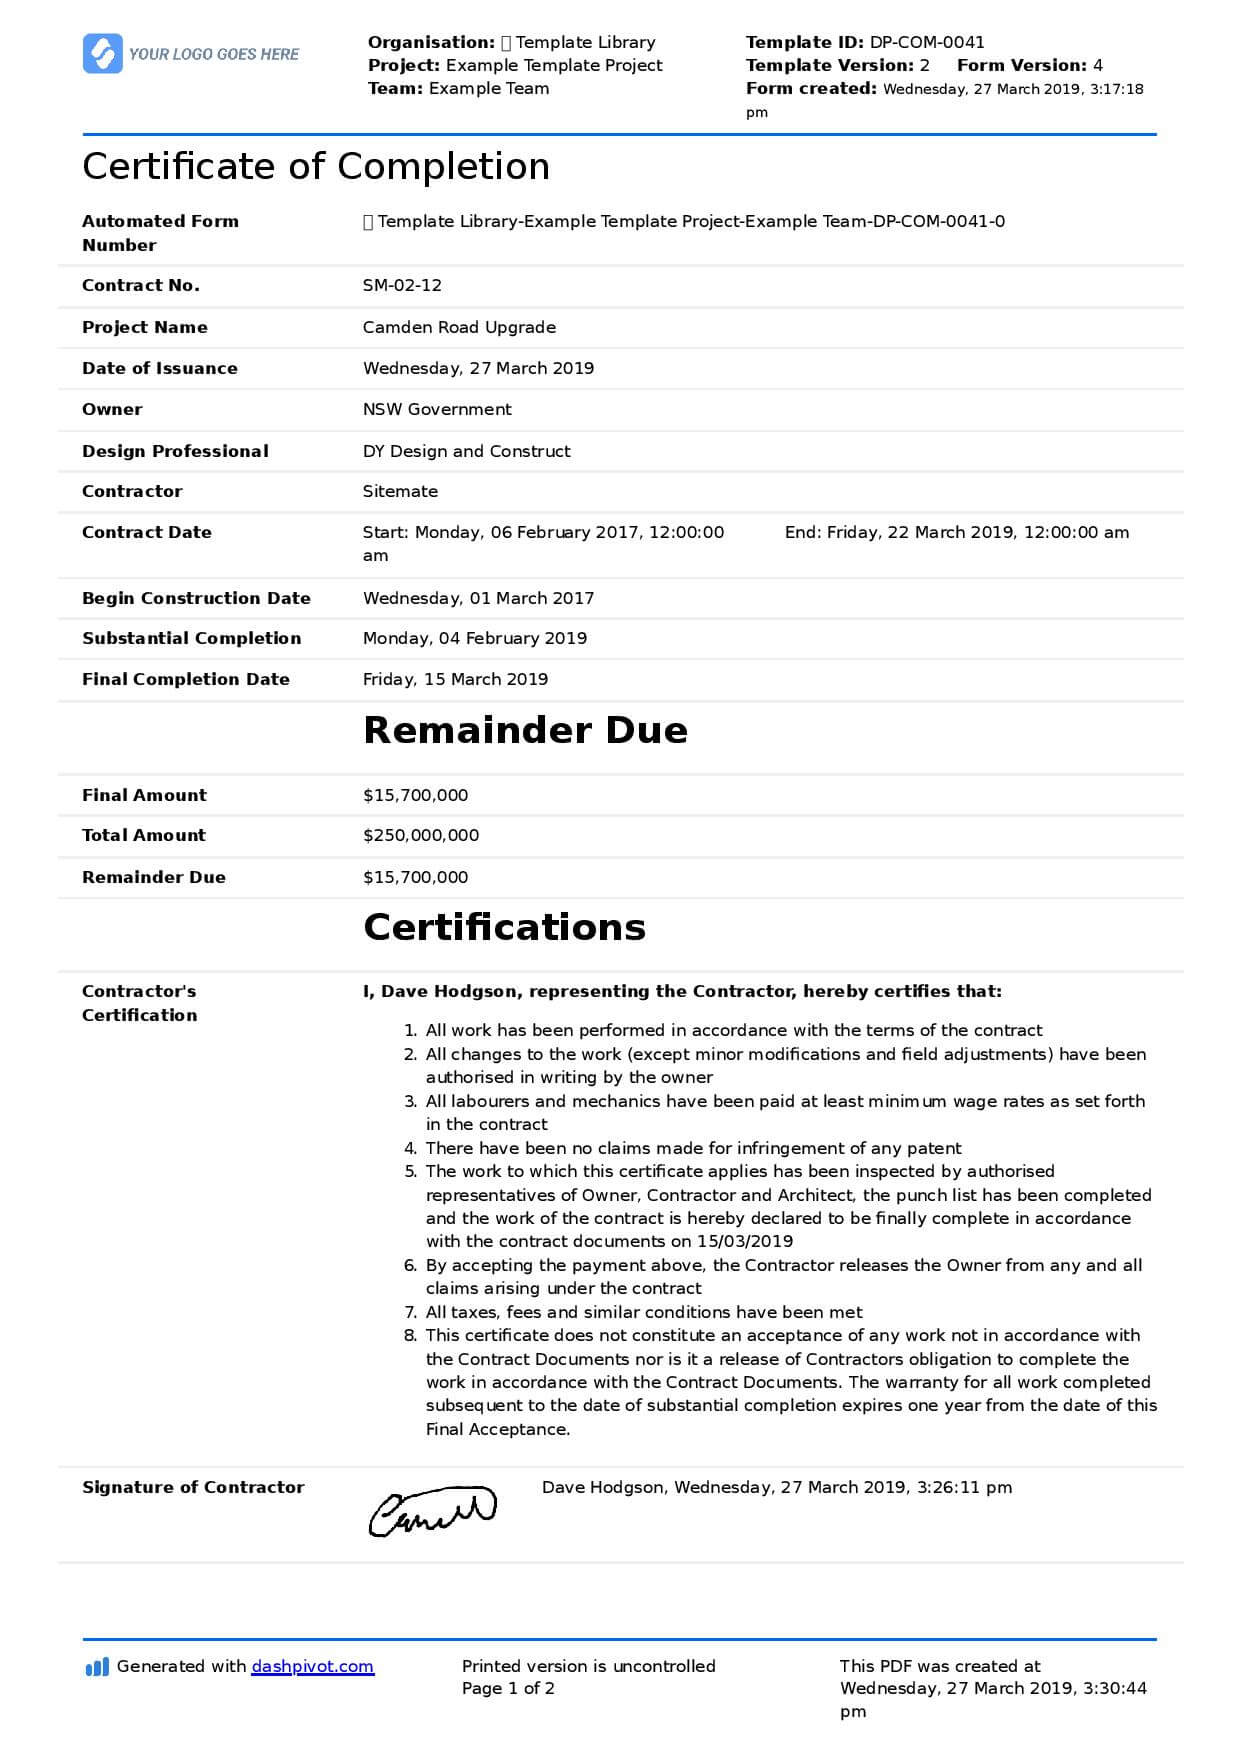 Certificate Of Completion For Construction (Free Template + Inside Construction Certificate Of Completion Template